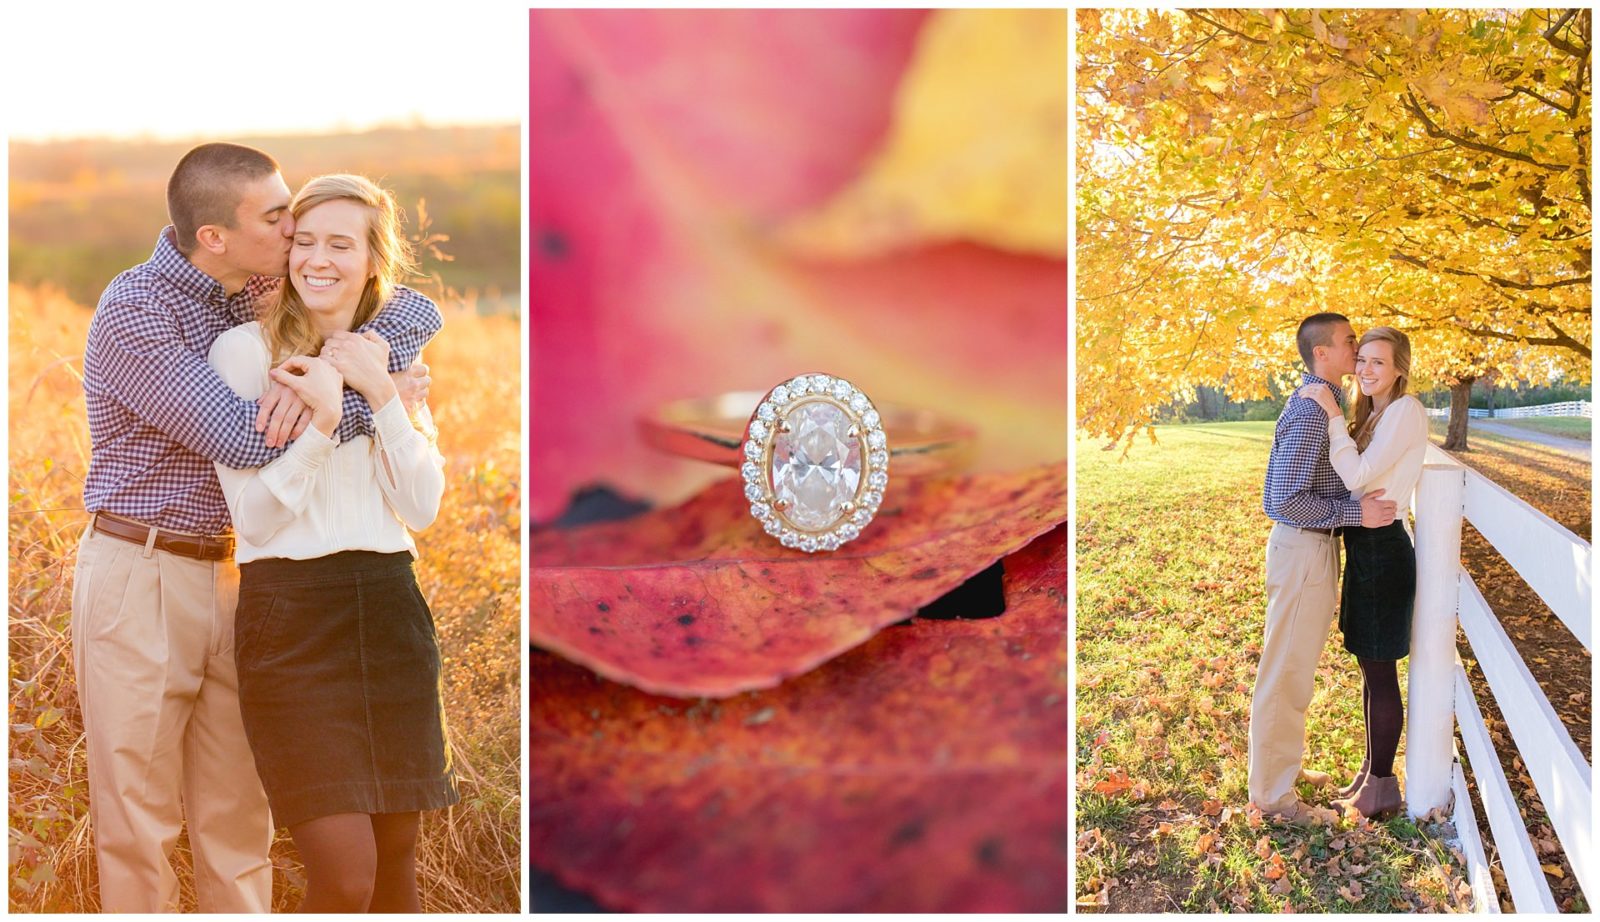 Countryside Fall Engagement Session at Shaker Village in Harrodsburg, KY